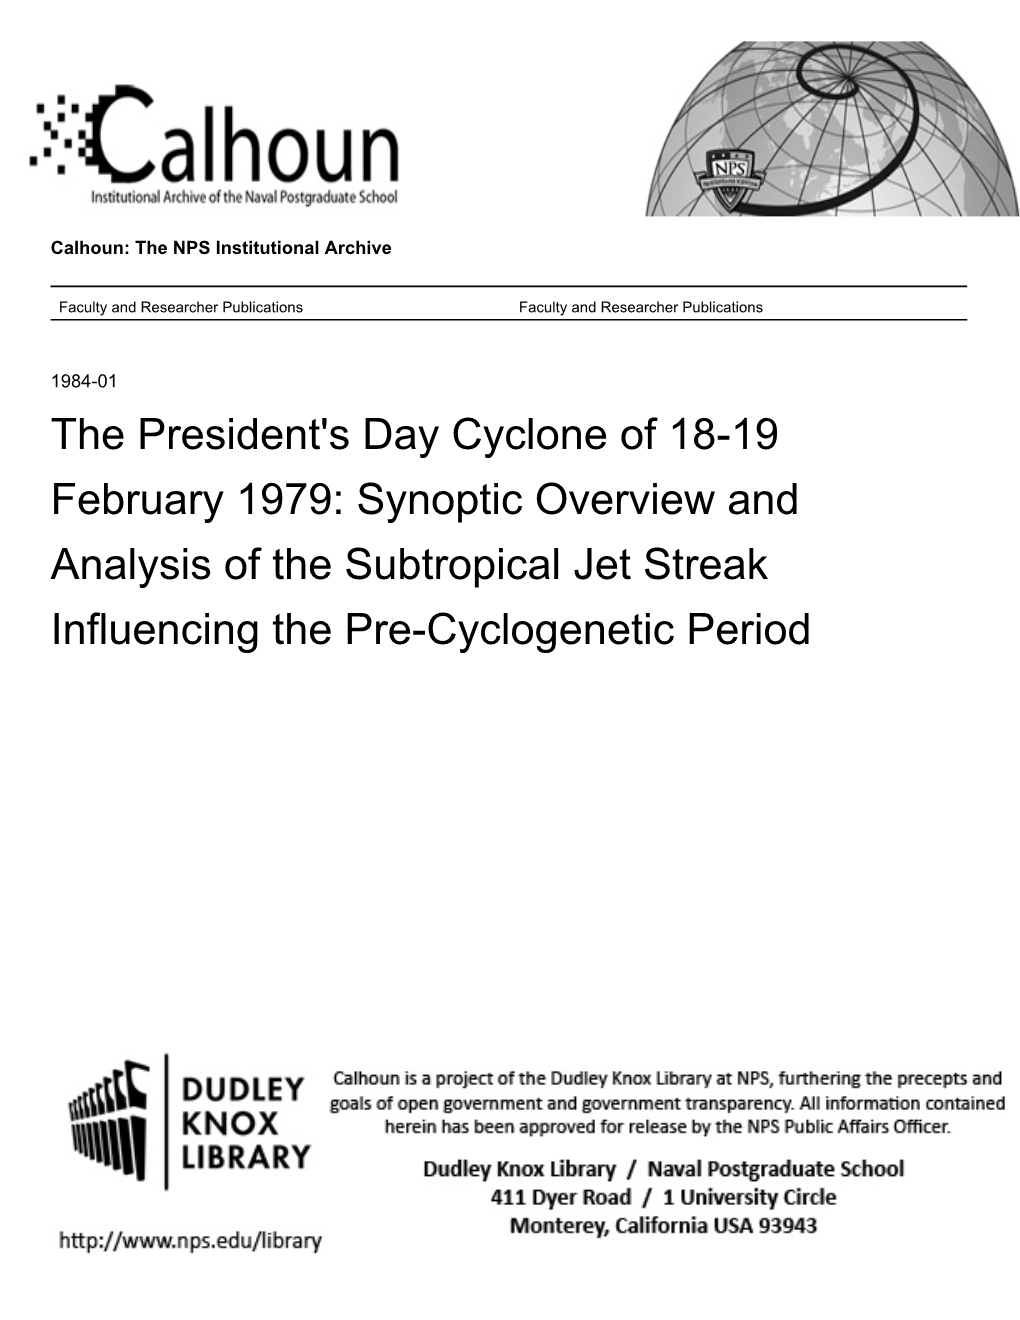 The President's Day Cyclone of 18-19 February 1979: Synoptic Overview and Analysis of the Subtropical Jet Streak Influencing the Pre-Cyclogenetic Period